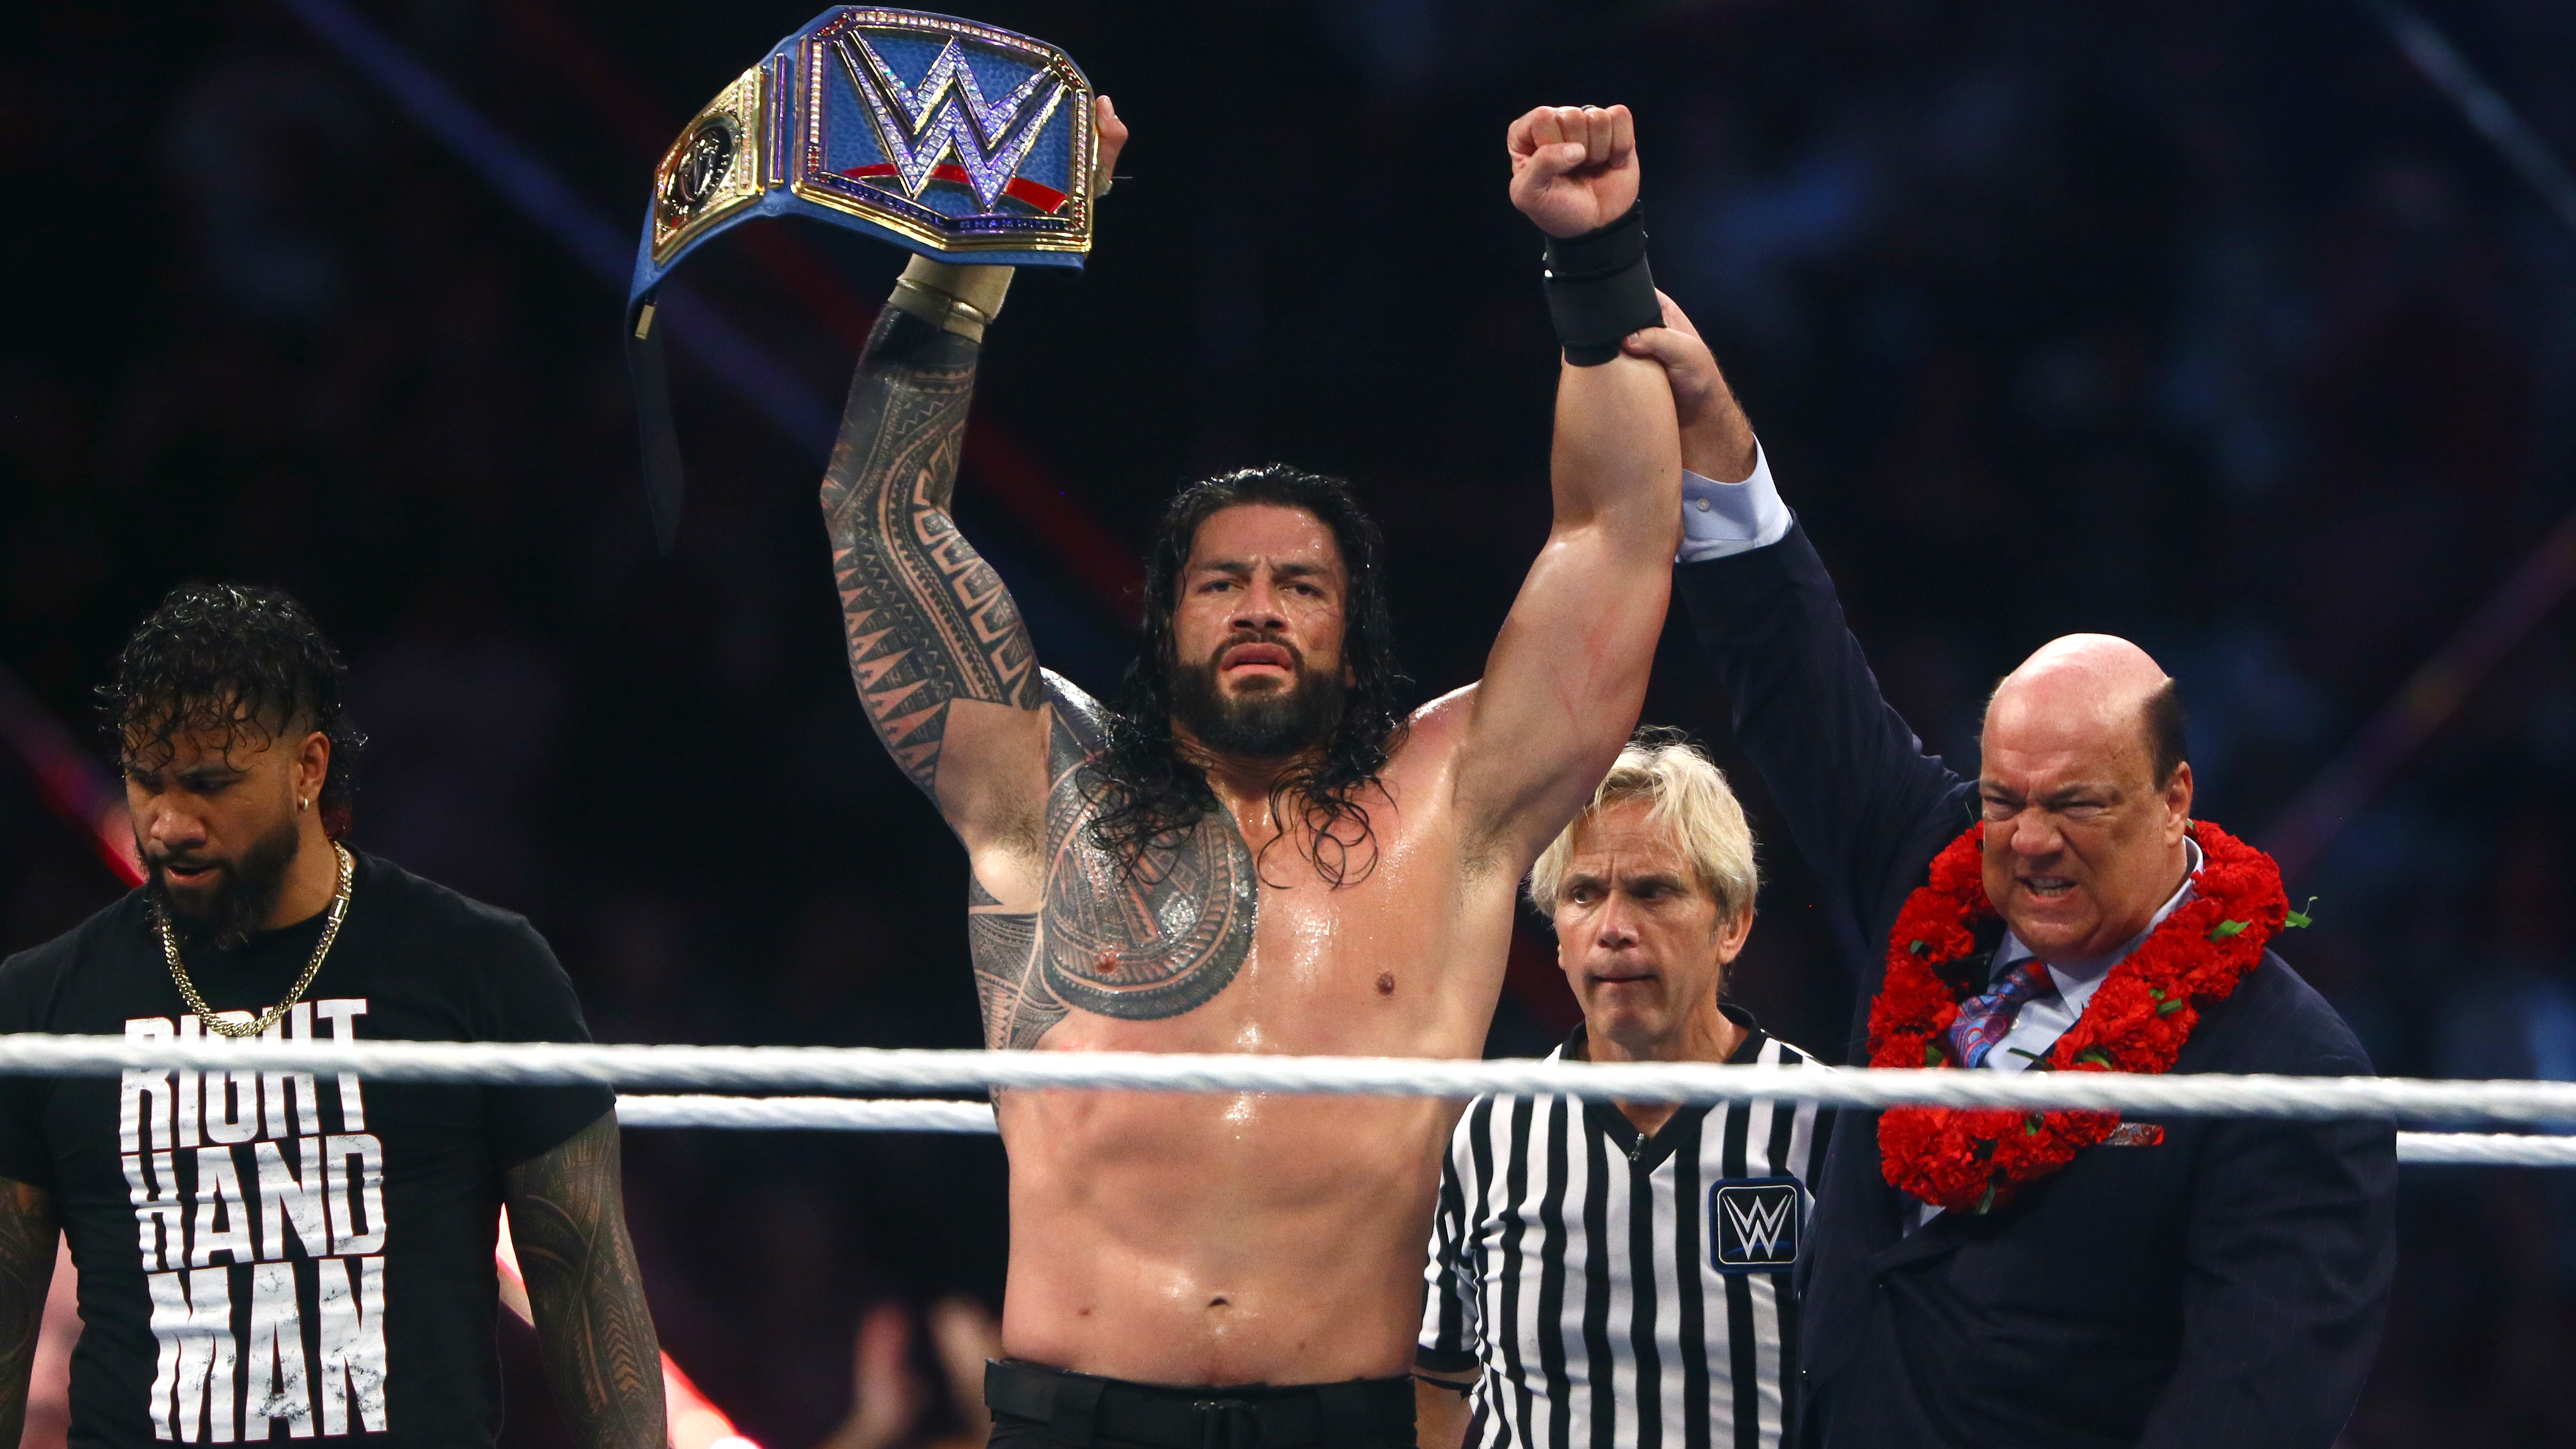 Roman Reigns embraces heel role at retains WWE Universal title